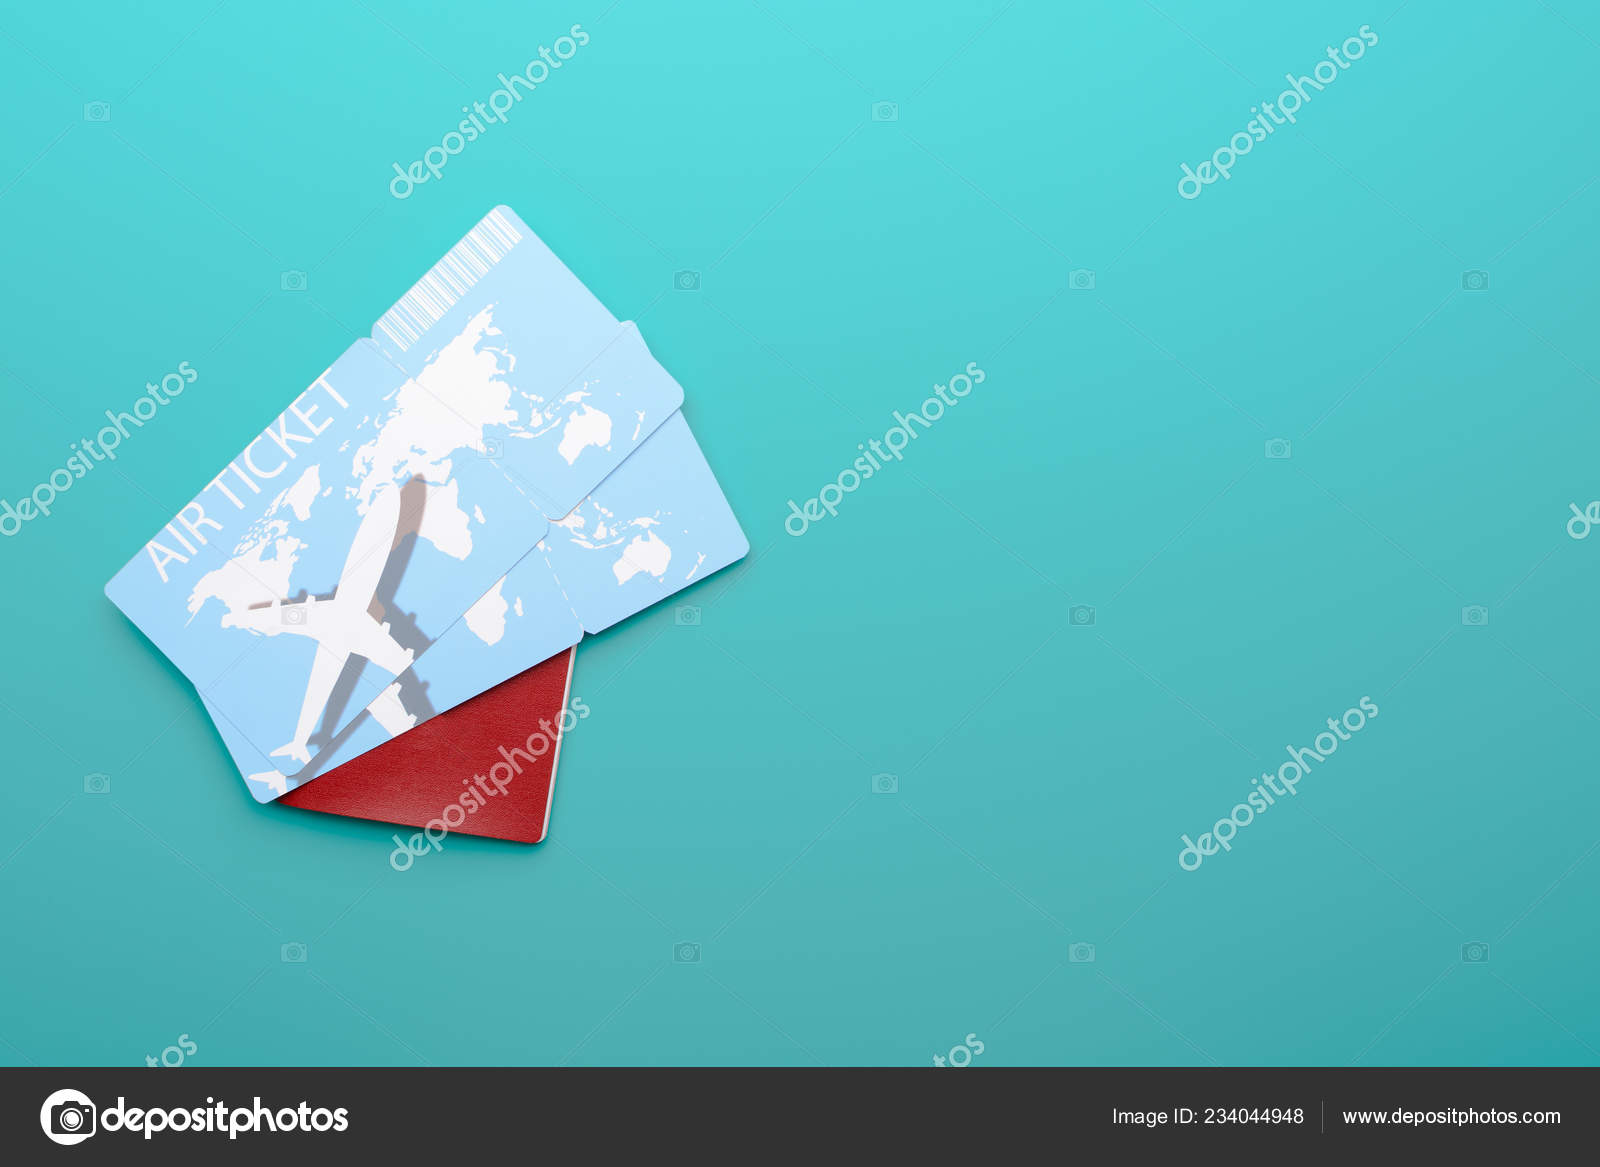 Two Plane Tickets Lying Passport Red Cover Left Side Turquoise Stock Photo C Ramif 234044948